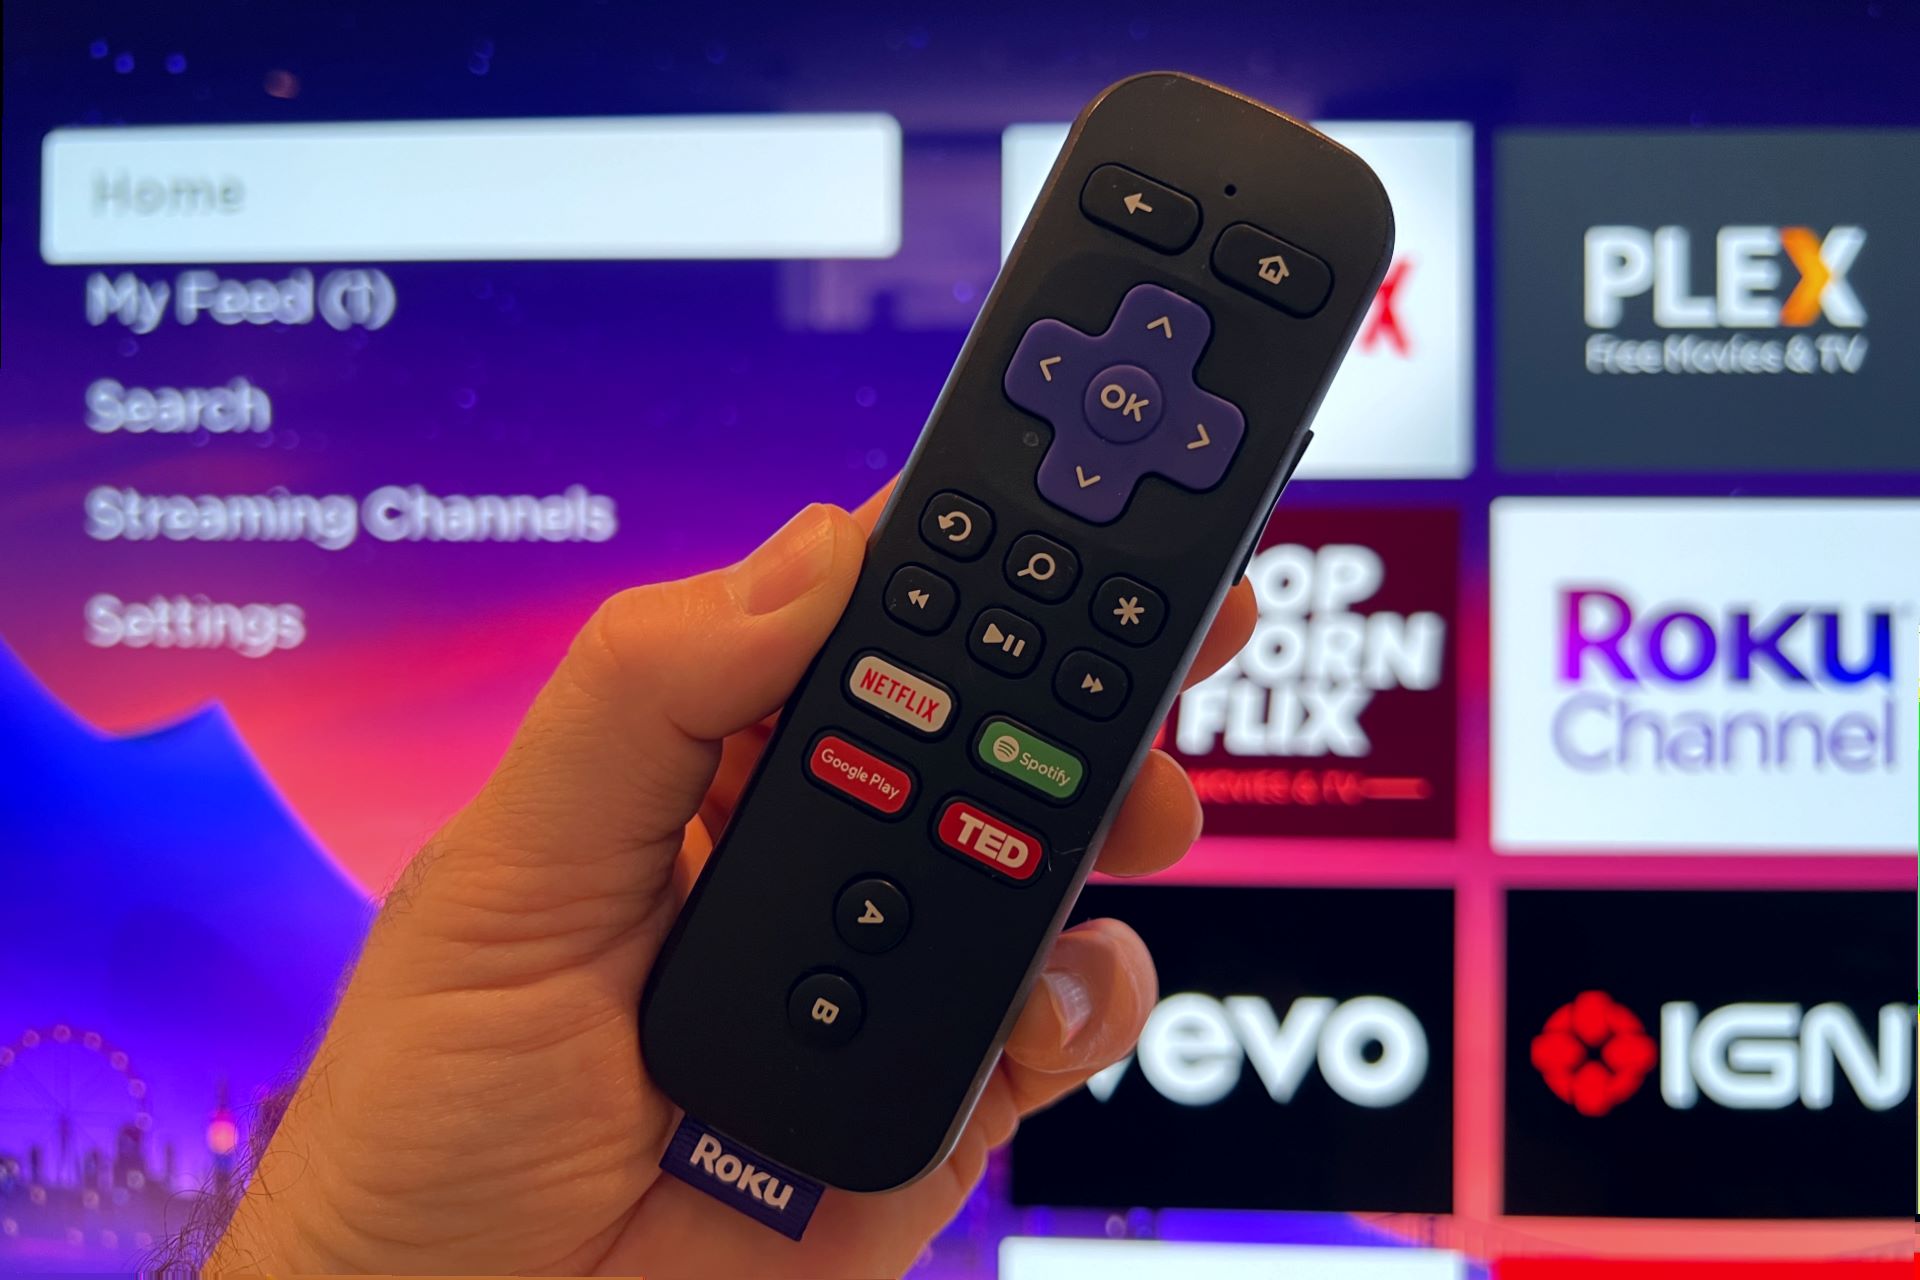 Roku Requires Users To Consent To New Terms Before Accessing Devices